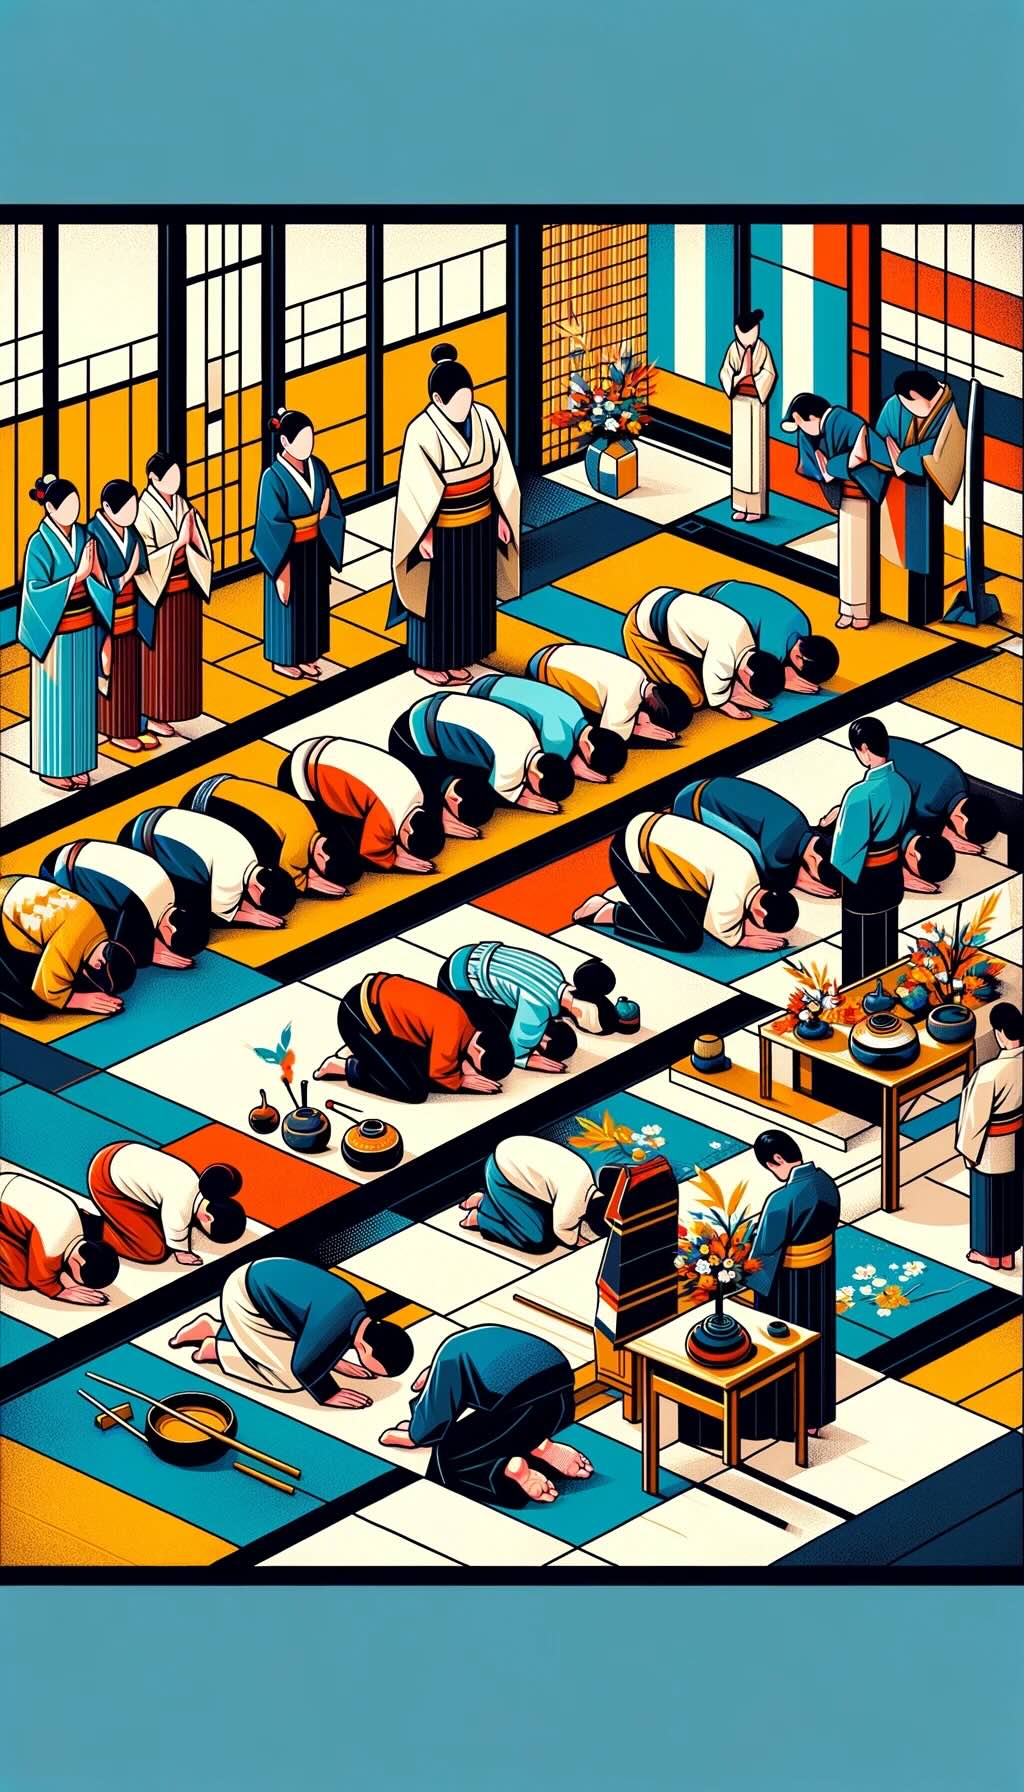 Description of bowing in special circumstances in Japan: Japanese Tea Ceremony: This scene portrays participants bowing in a tea ceremony ('chanoyu' or 'sado'), capturing the essence of respect and harmony. The participants and tea utensils are illustrated with a focus on the profound cultural significance of the bows. Martial Arts Dojo: The image depicts practitioners in a martial arts dojo, illustrating the respect and gratitude embedded in the act of bowing upon entering and leaving the dojo, as well as in interactions with partners. Traditional Performances: Performers in traditional Japanese arts like Noh, Kabuki, and Bunraku are shown bowing to their audience, emphasizing the respect paid to the art form and the audience. Service Industries and Hospitality: This part of the image reflects the practice of bowing in Japan's service and hospitality sectors, symbolizing the warm welcome and gratitude expressed to guests in hotels, ryokans, and other service establishments. It highlights the cultural nuances and significance of bowing in these unique Japanese settings.